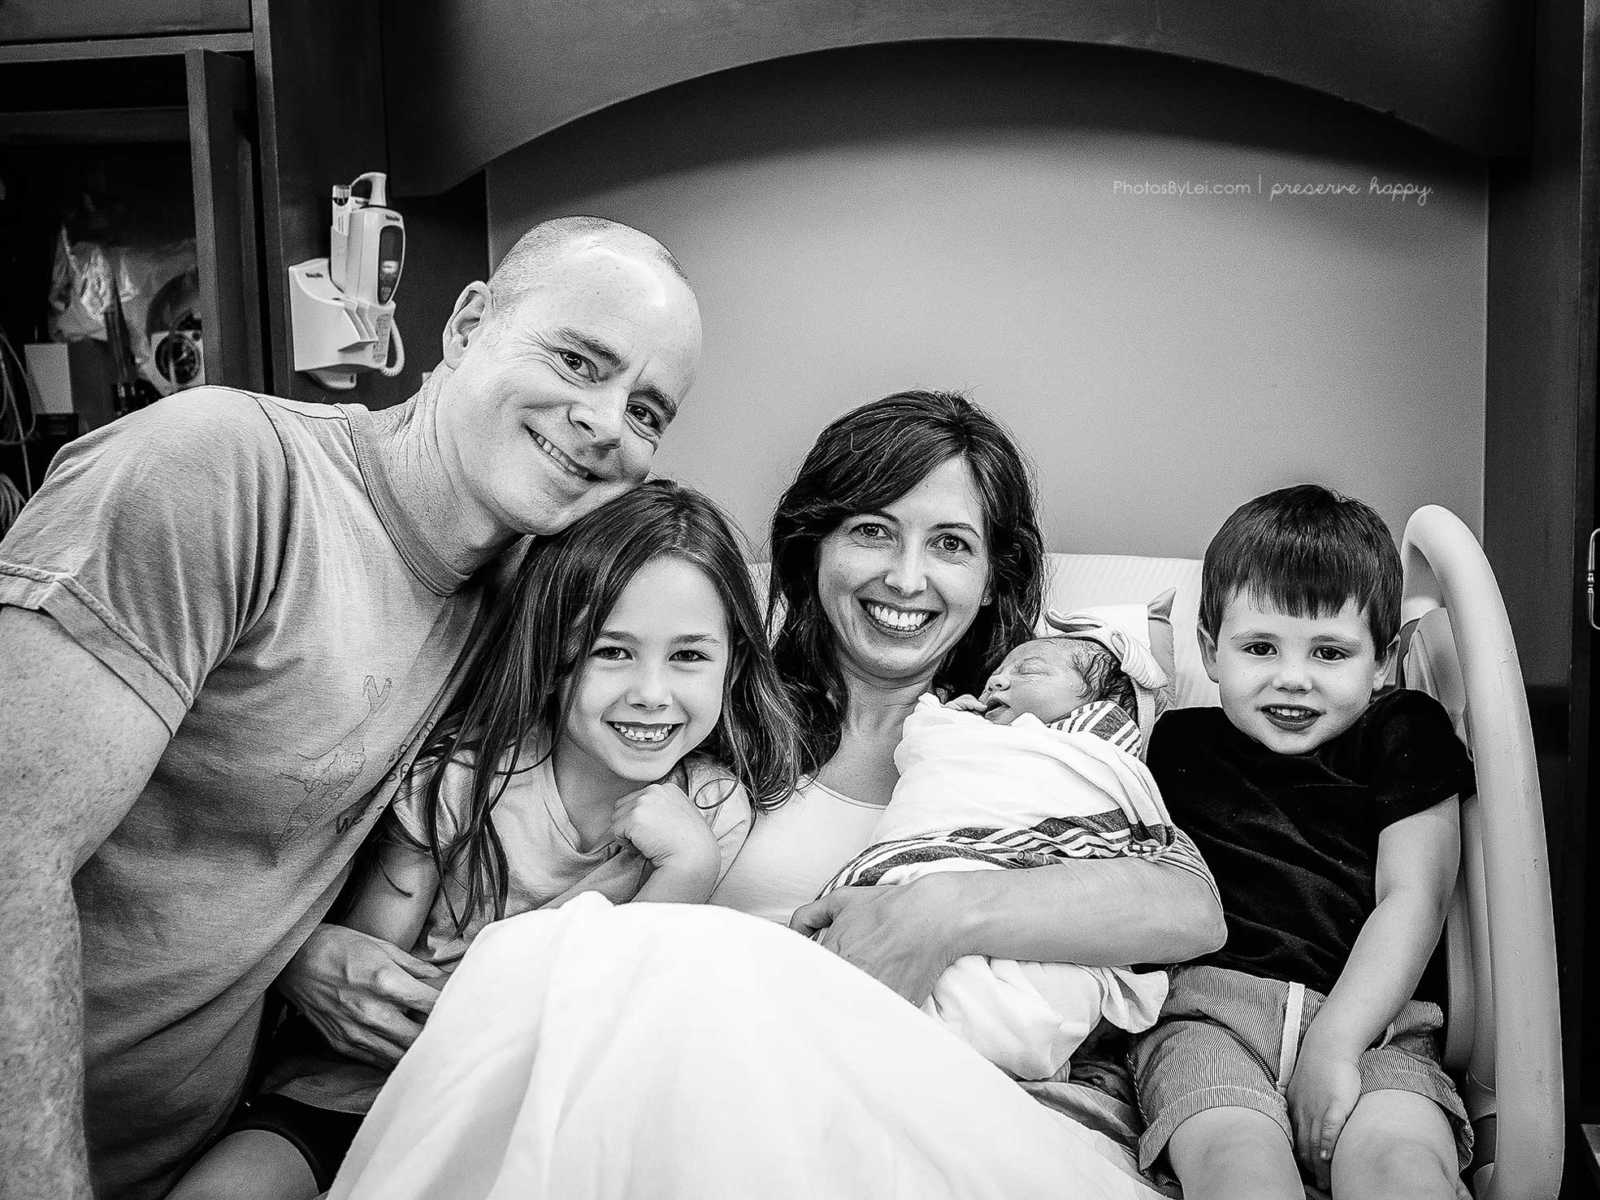 Mother who gave birth to baby covered in amniotic fluid smiles in hospital bed with newborn, son, daughter and husband